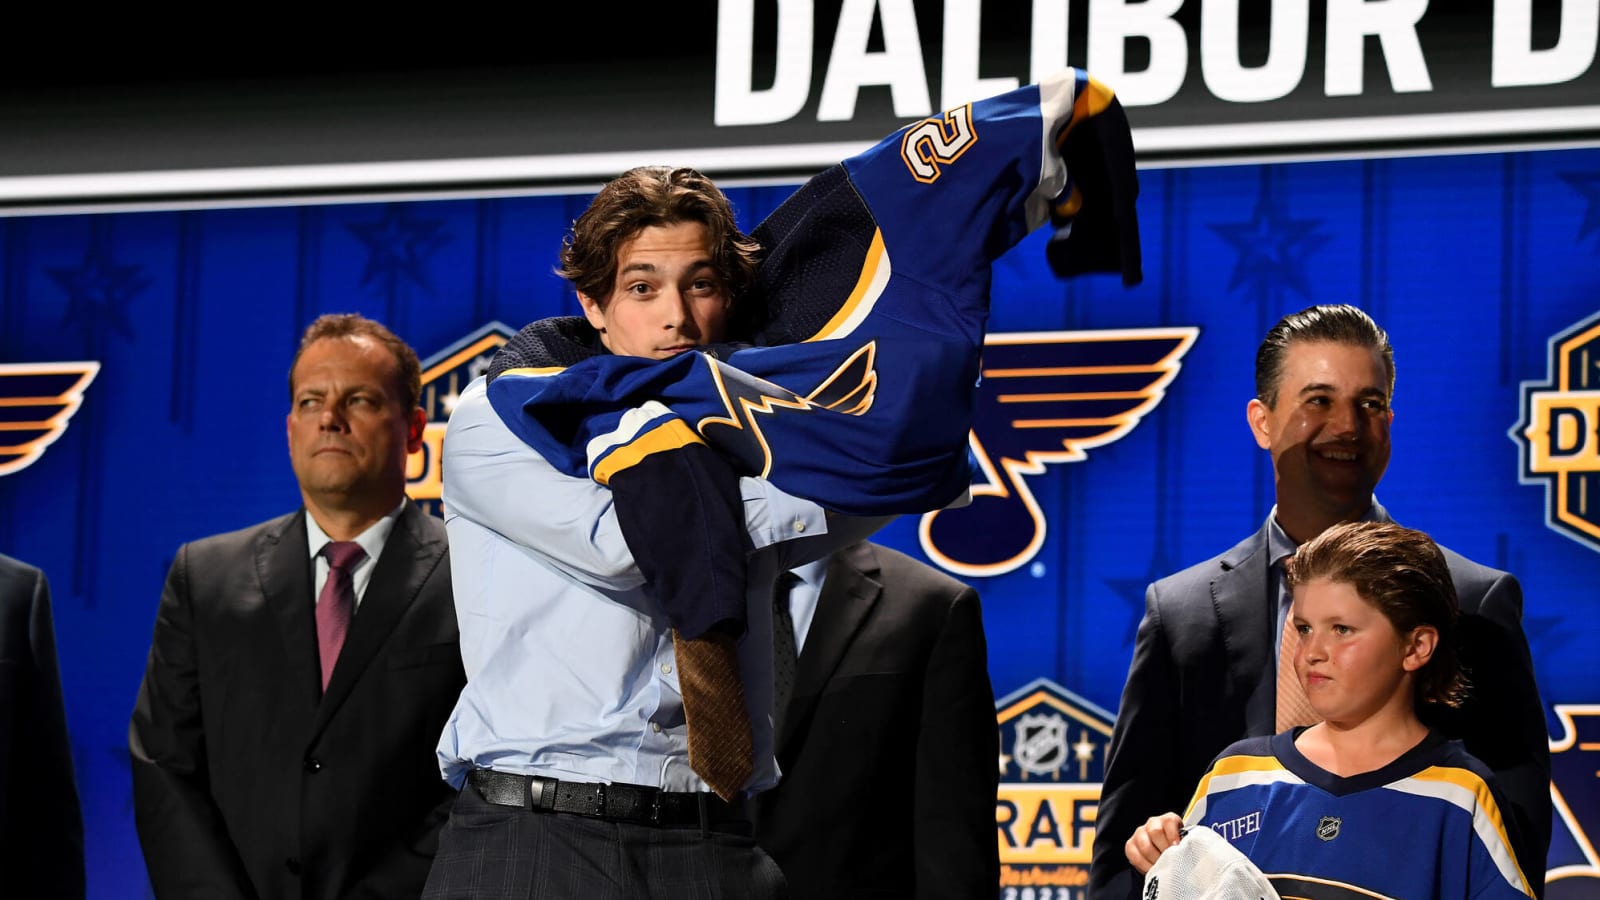 St. Louis Blues prospect Dalibor Dvorsky expected to join Sudbury Wolves